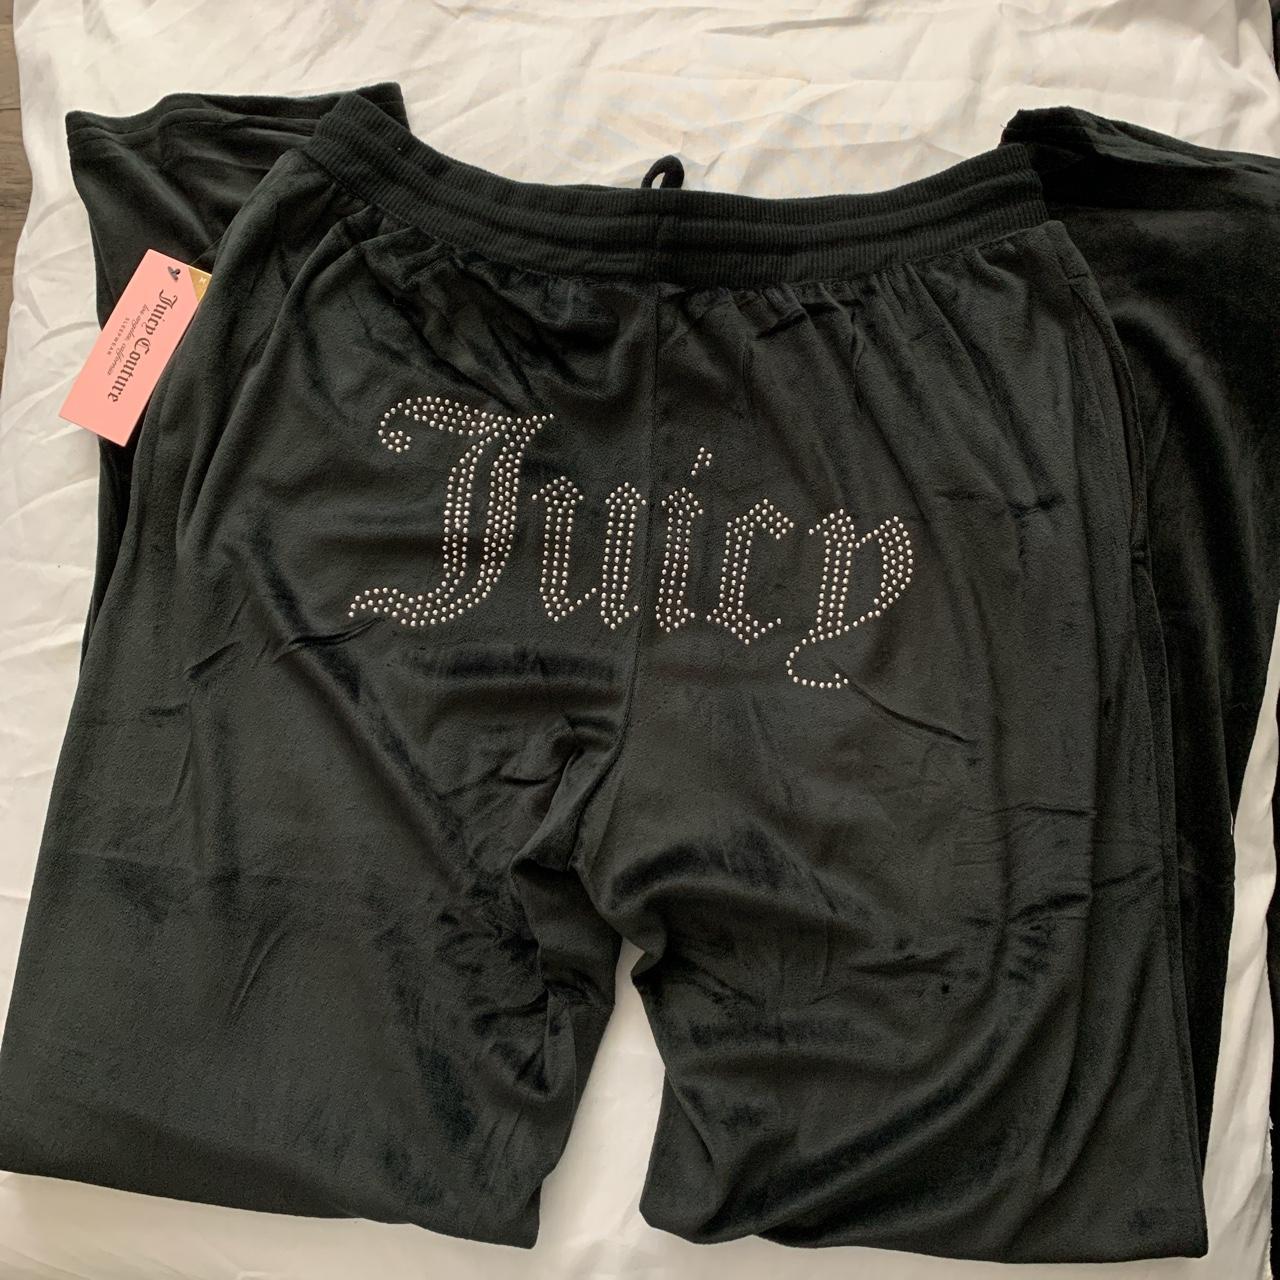 Juicy Couture Women's Pants for sale